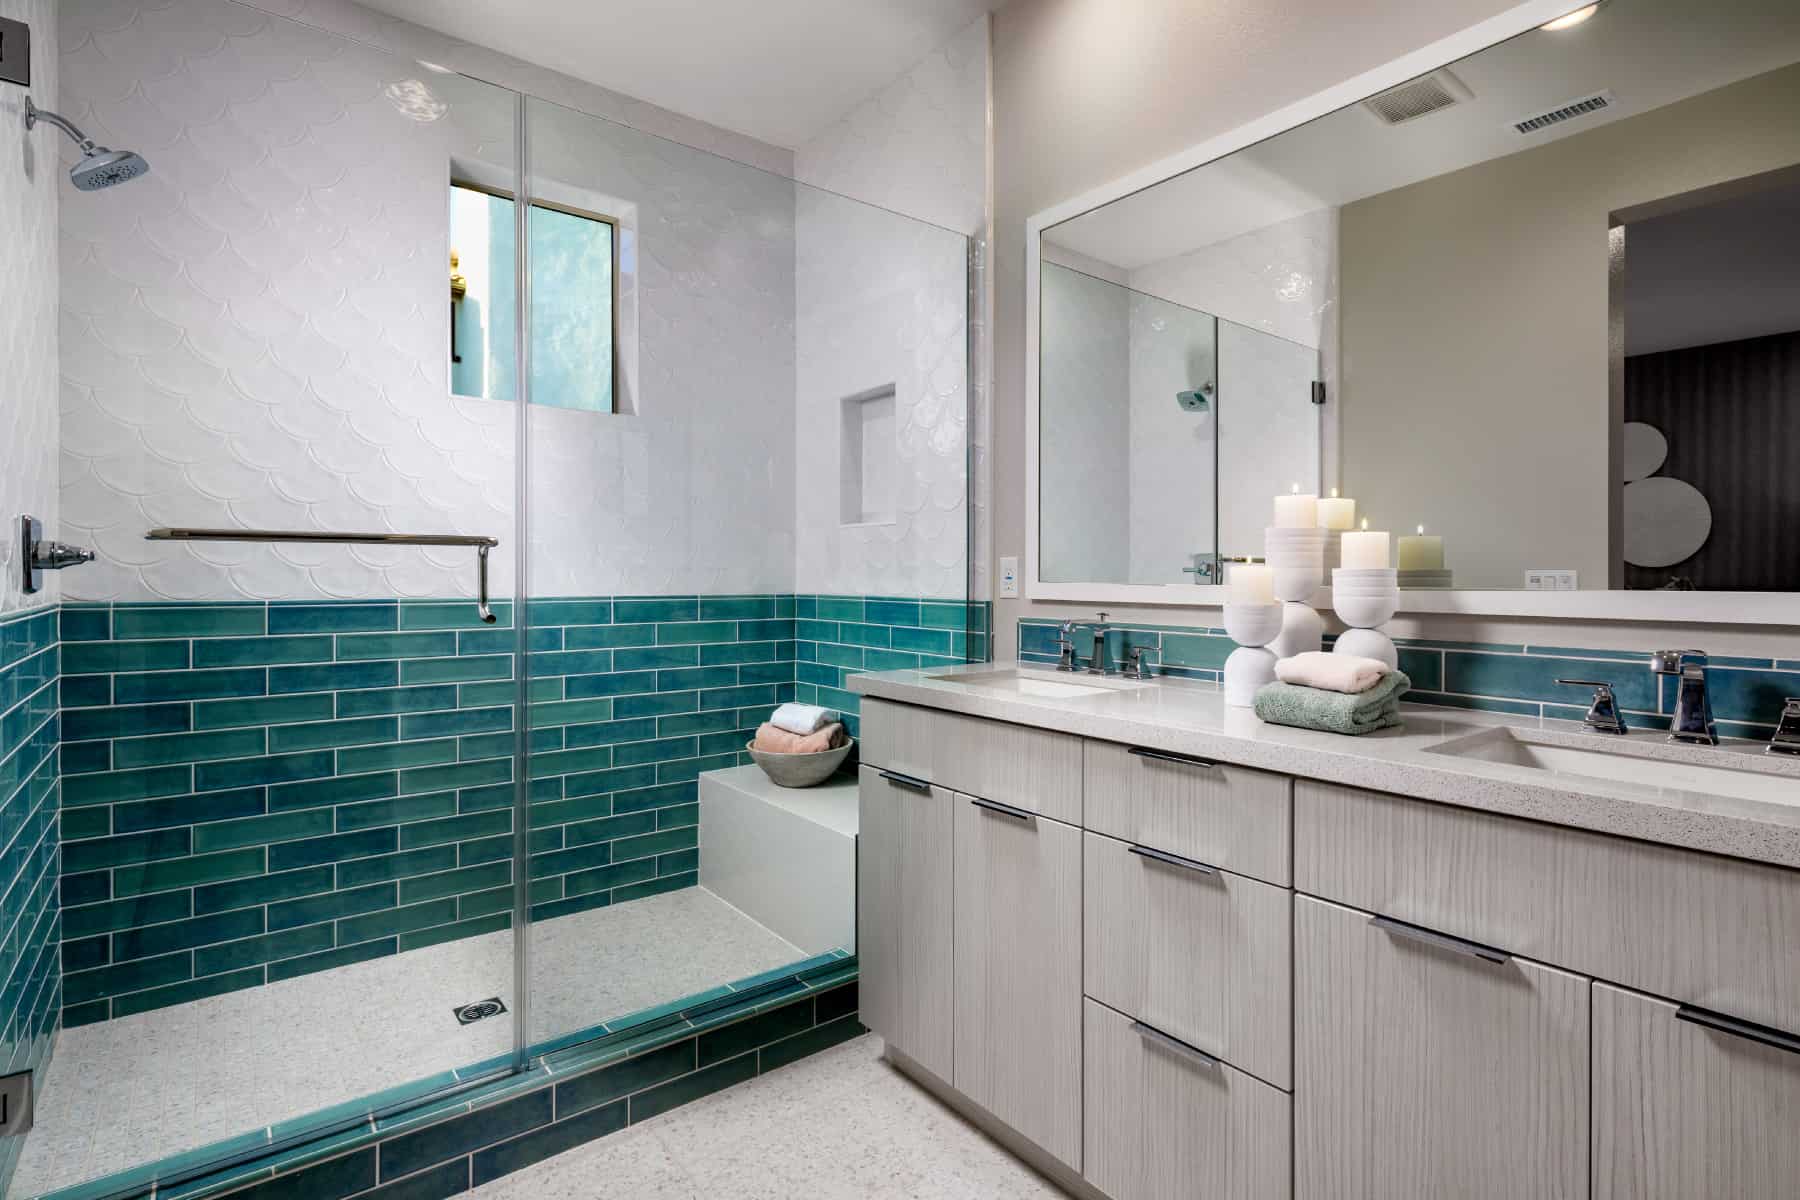 Primary Bath at Plan 1 of Belmont by Melia Homes in Cypress, CA